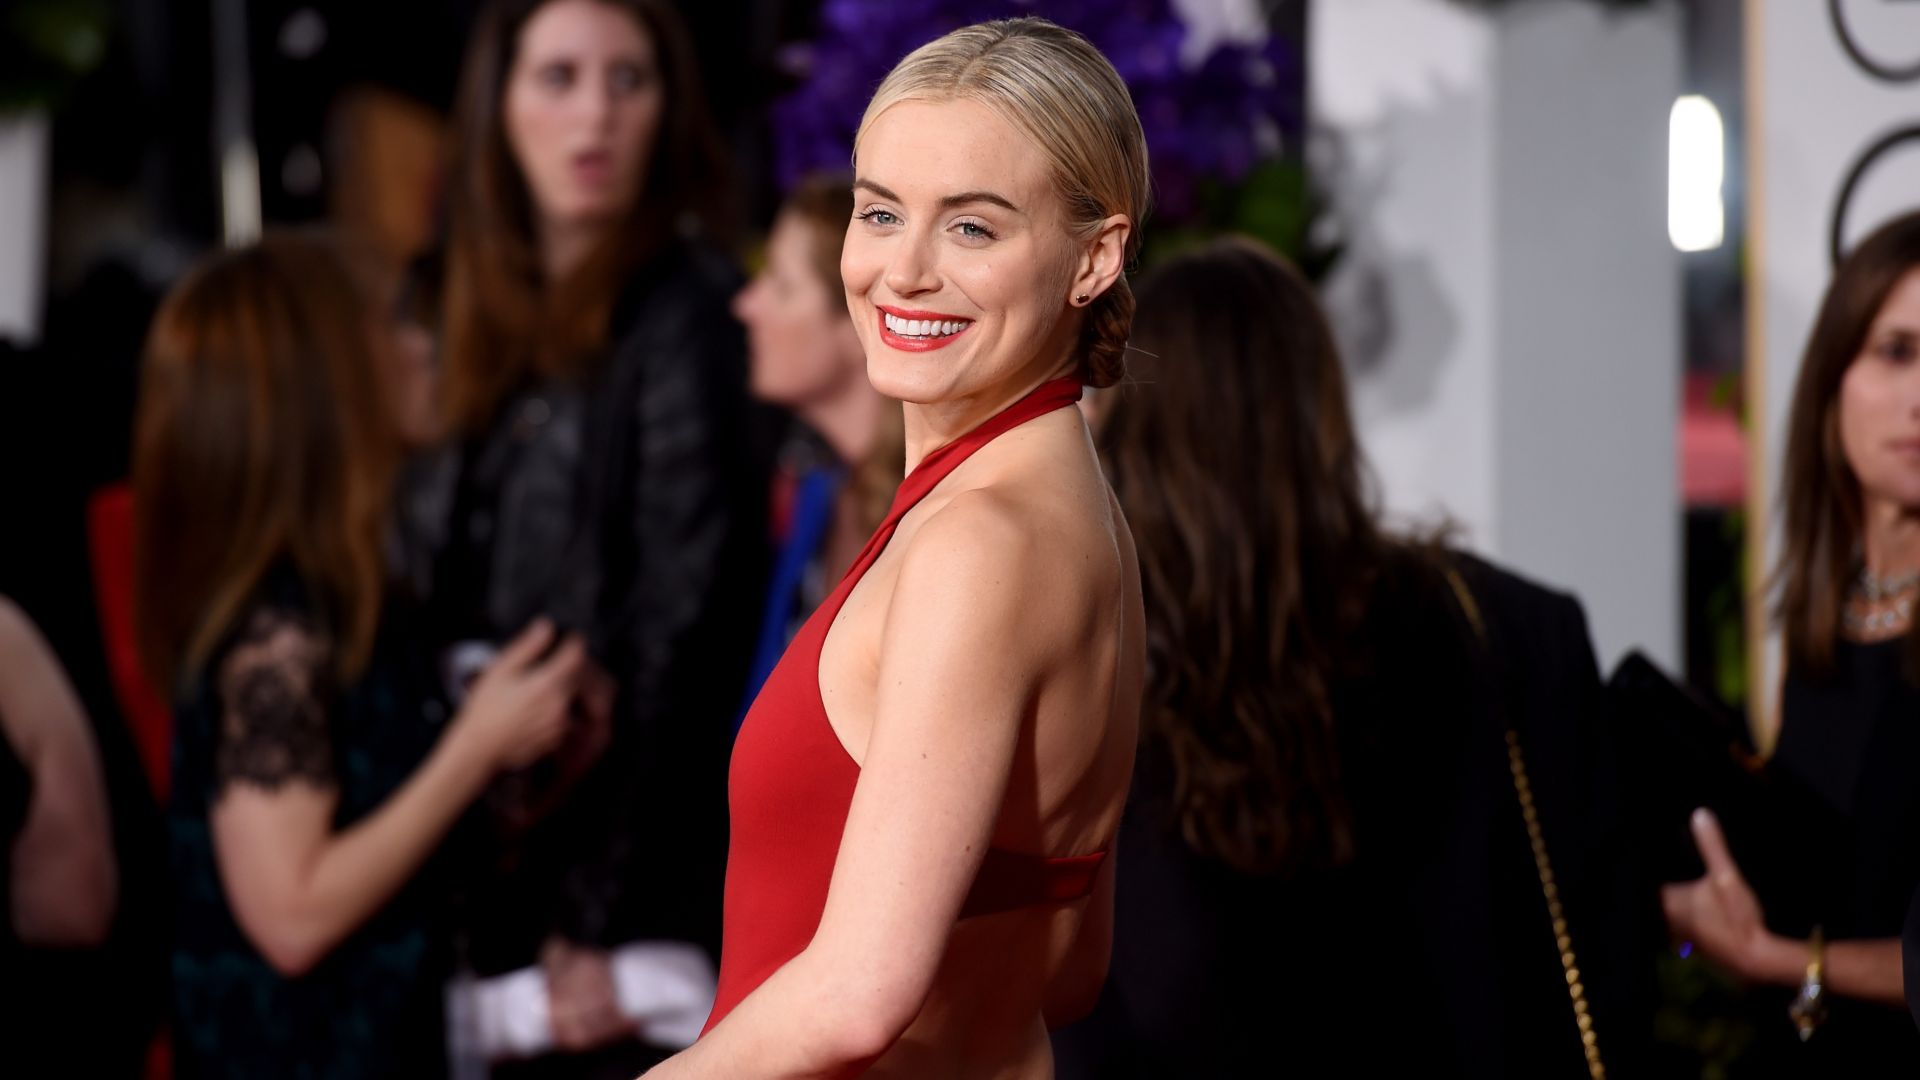 Wallpaper Taylor Schilling's smiling face, actress